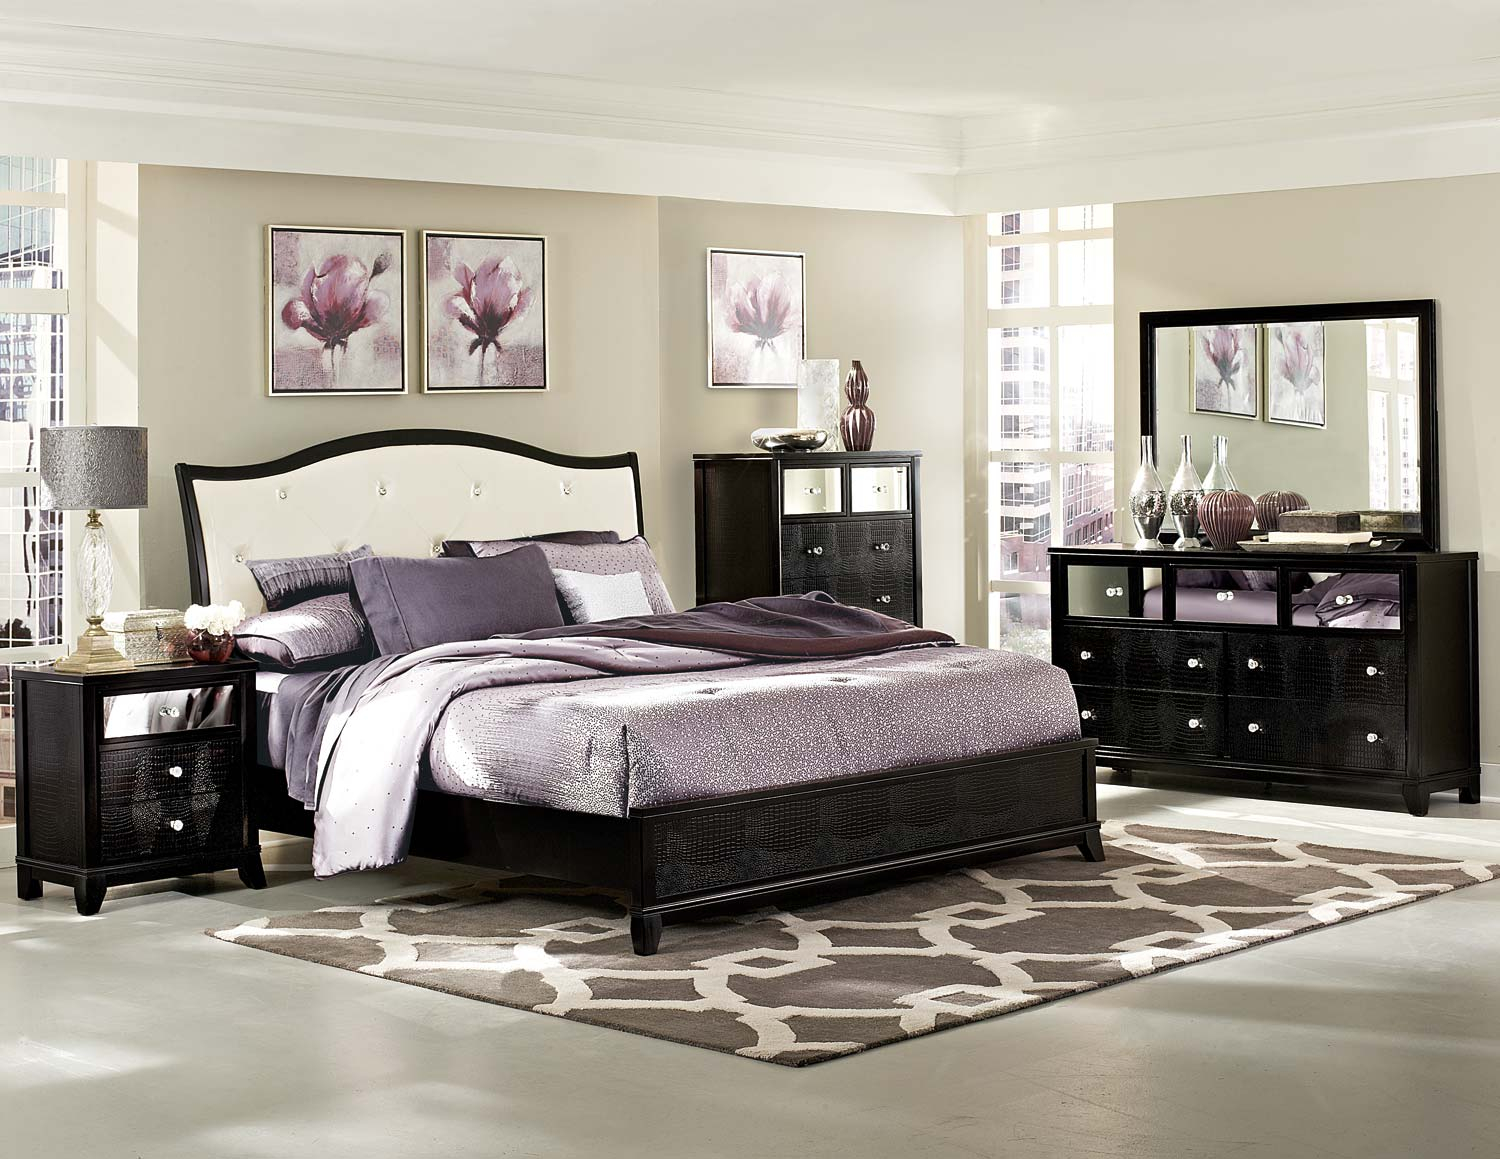 Homelegance Jacqueline Upholstered Bedroom Collection Faux Alligatorblack pertaining to dimensions 1500 X 1159